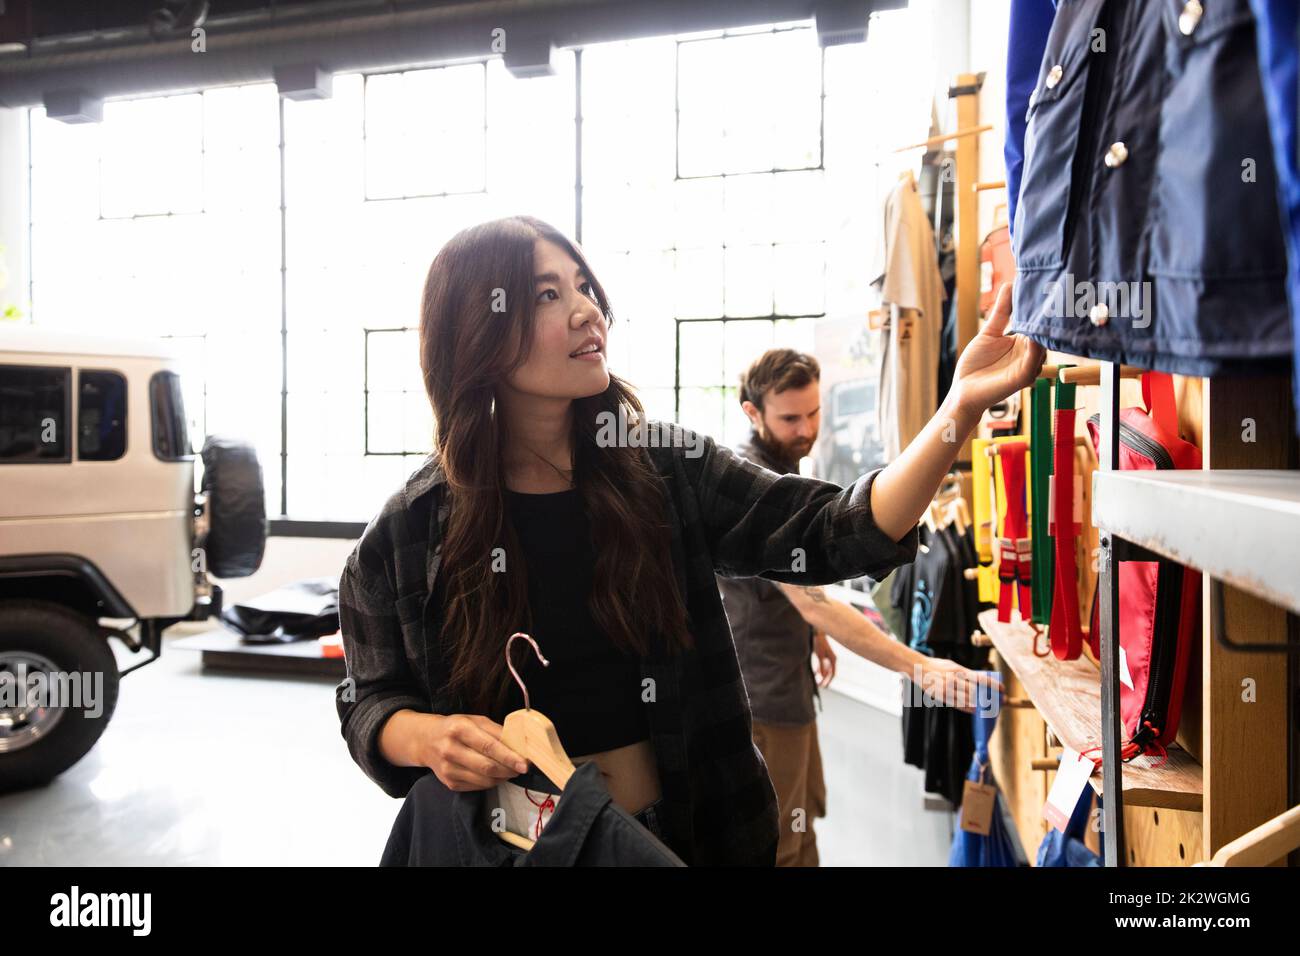 Woman shopping for outerwear in sporting goods store Stock Photo